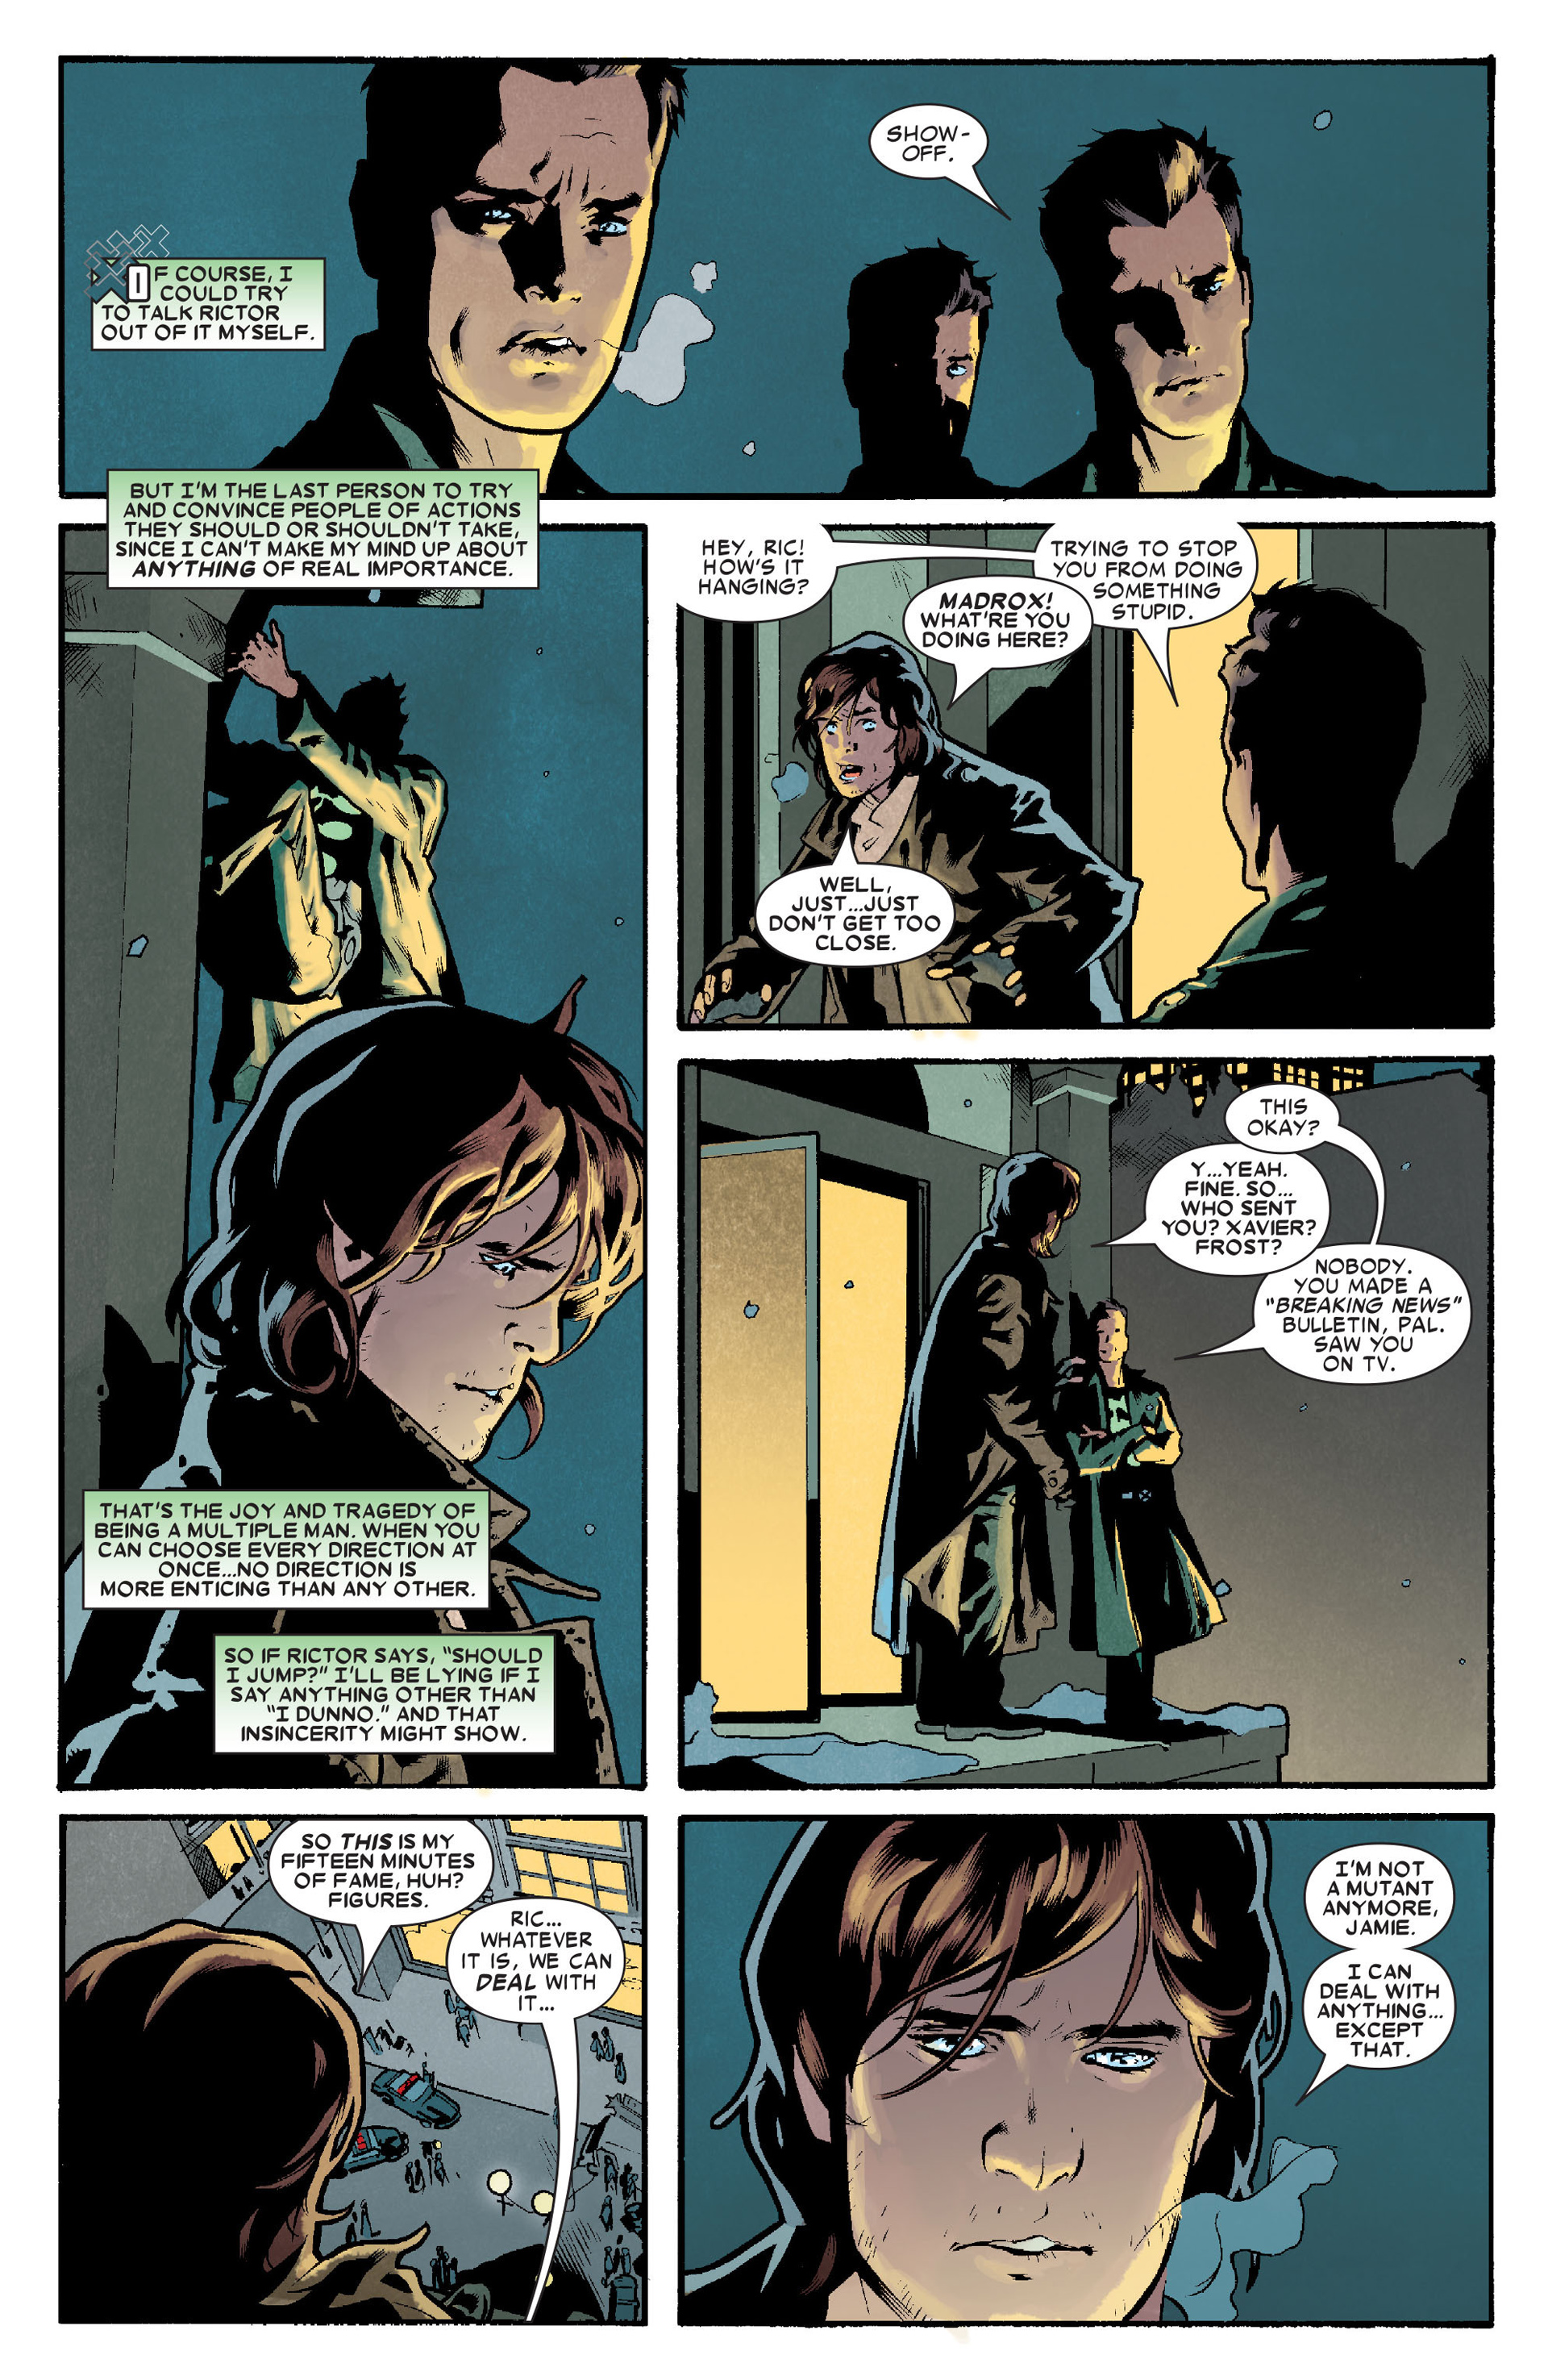 X-Factor (2006) 1 Page 4